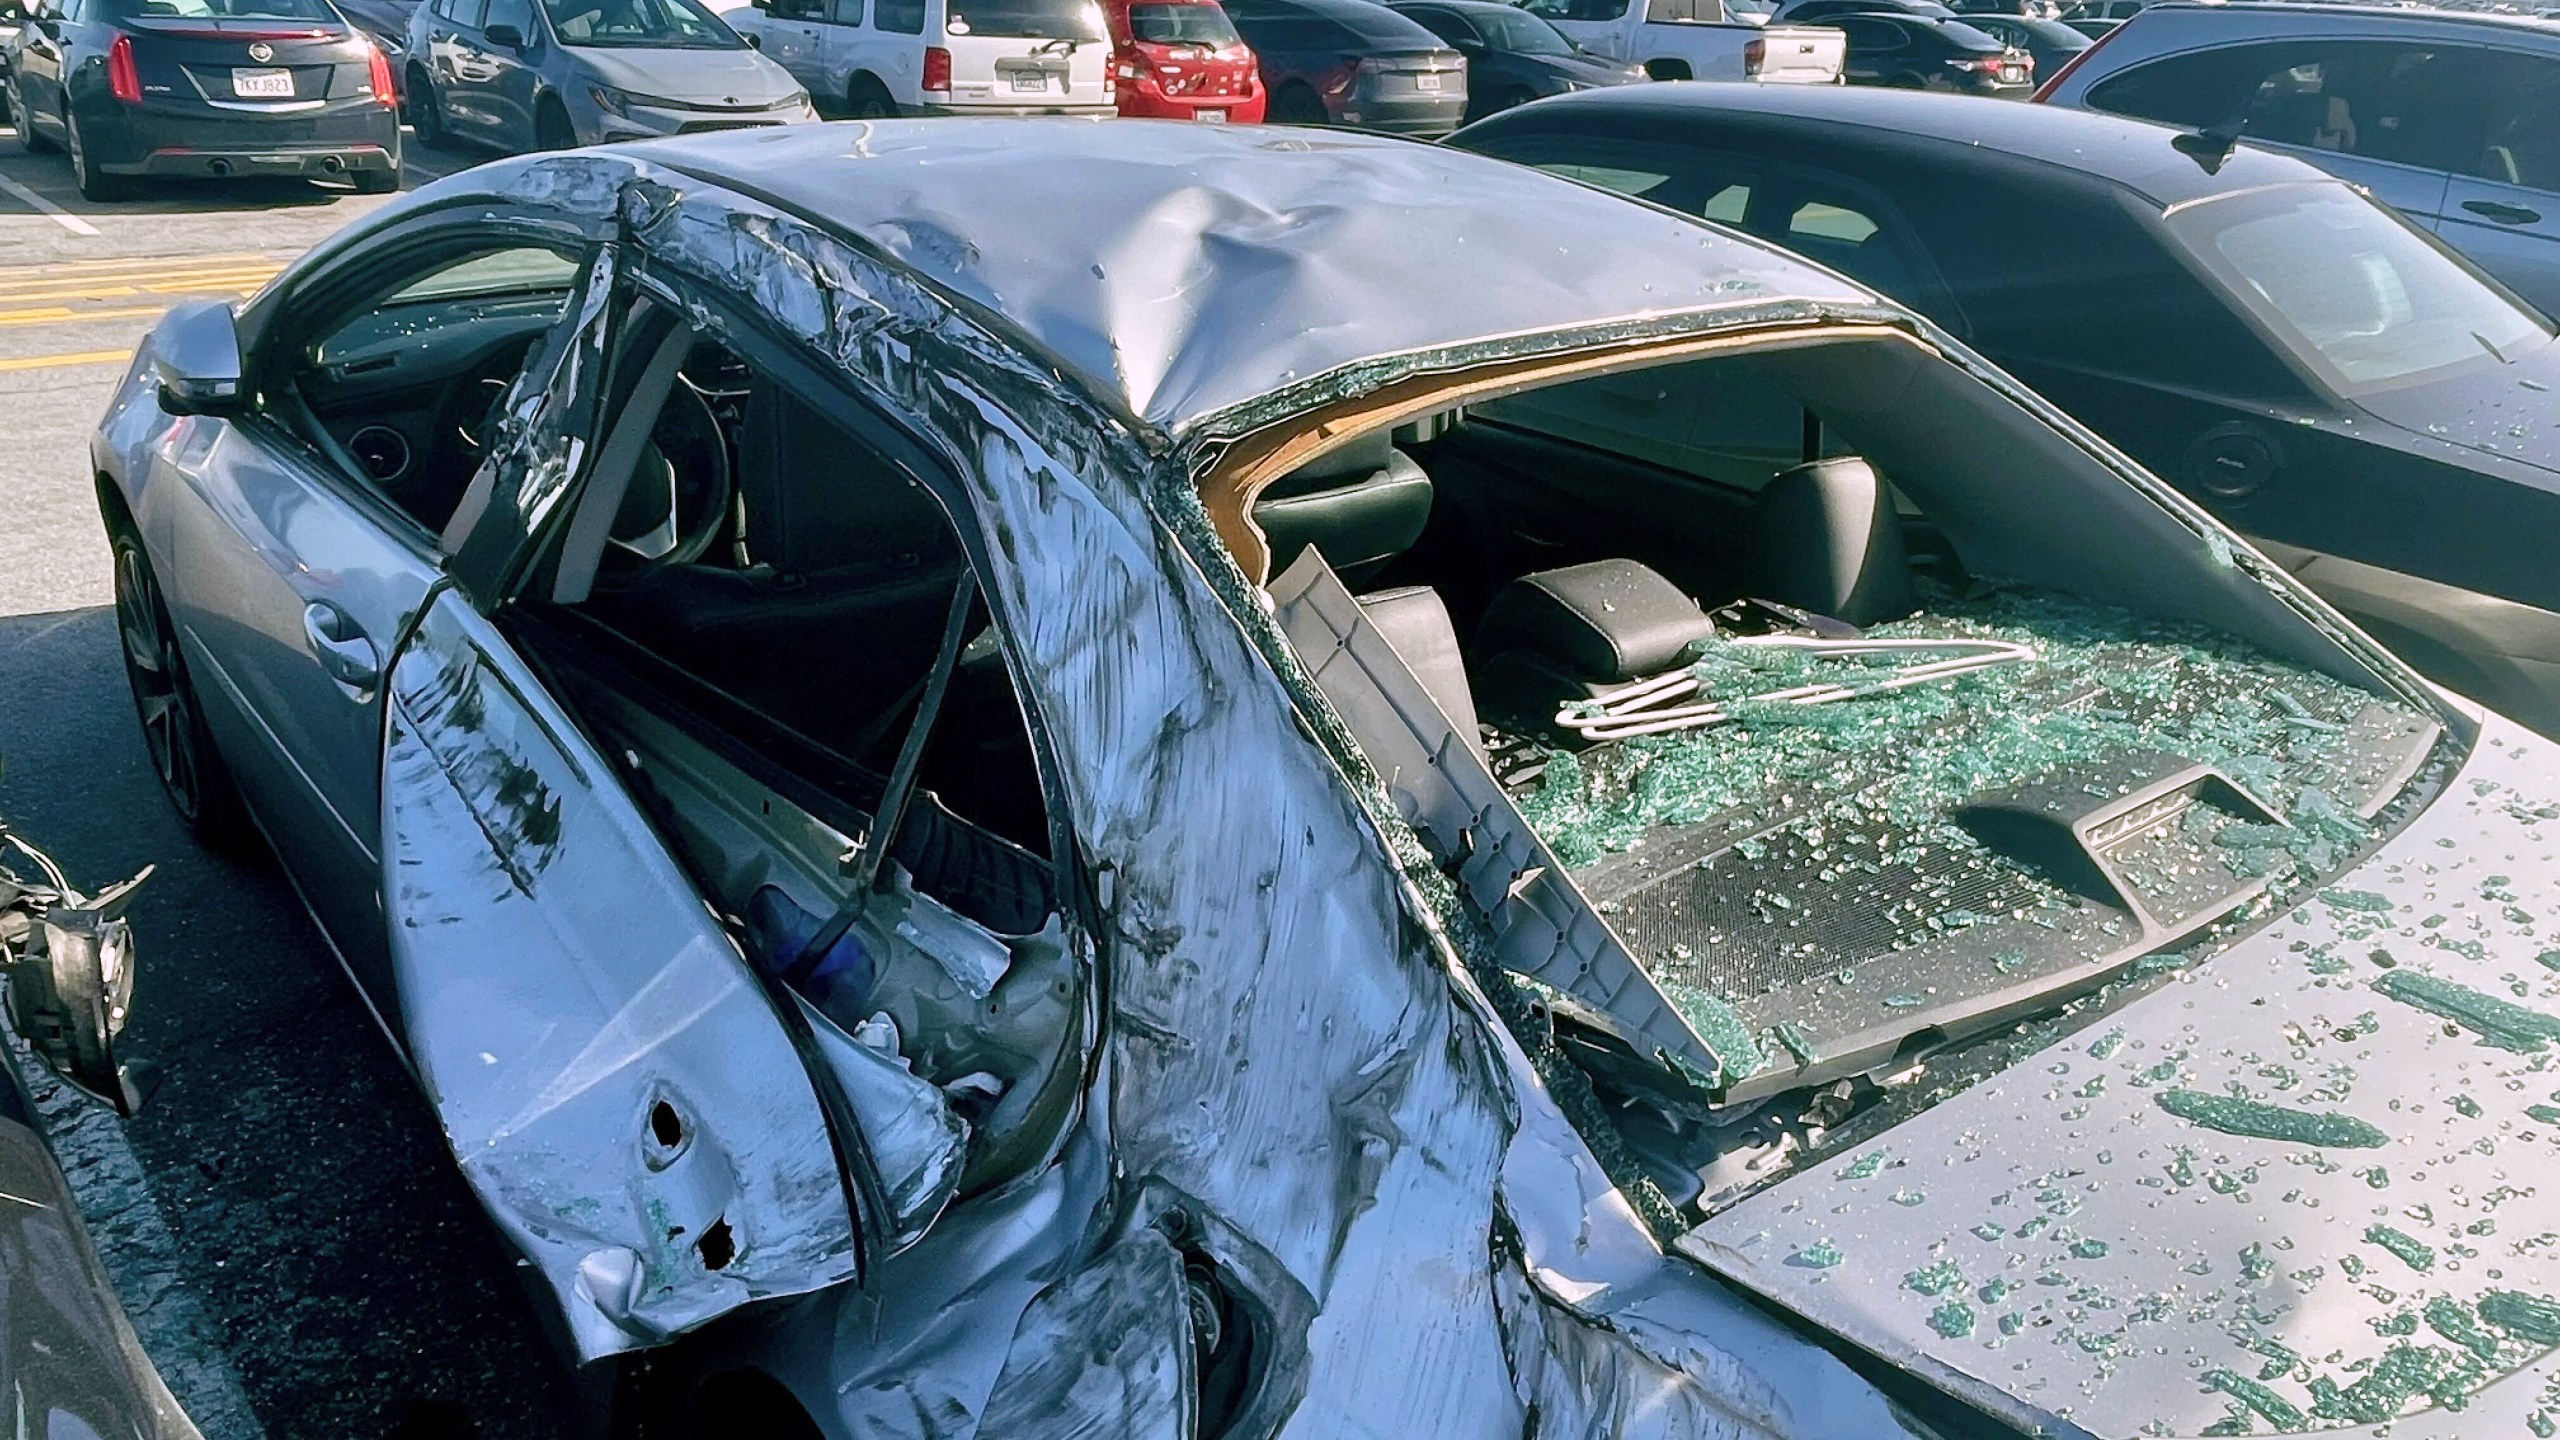 FILE - A damaged car is seen in a airport parking lot after debris from tire which fell from a Boeing 777 landed on it at San Francisco International Airport, March 7, 2024. Cracked windshields on jetliners and engine problems that cause flight delays don't normally attract much attention, but routine and rare problems with passenger planes are attracting an unusual amount of news coverage. (AP Photo/Haven Daley, File)